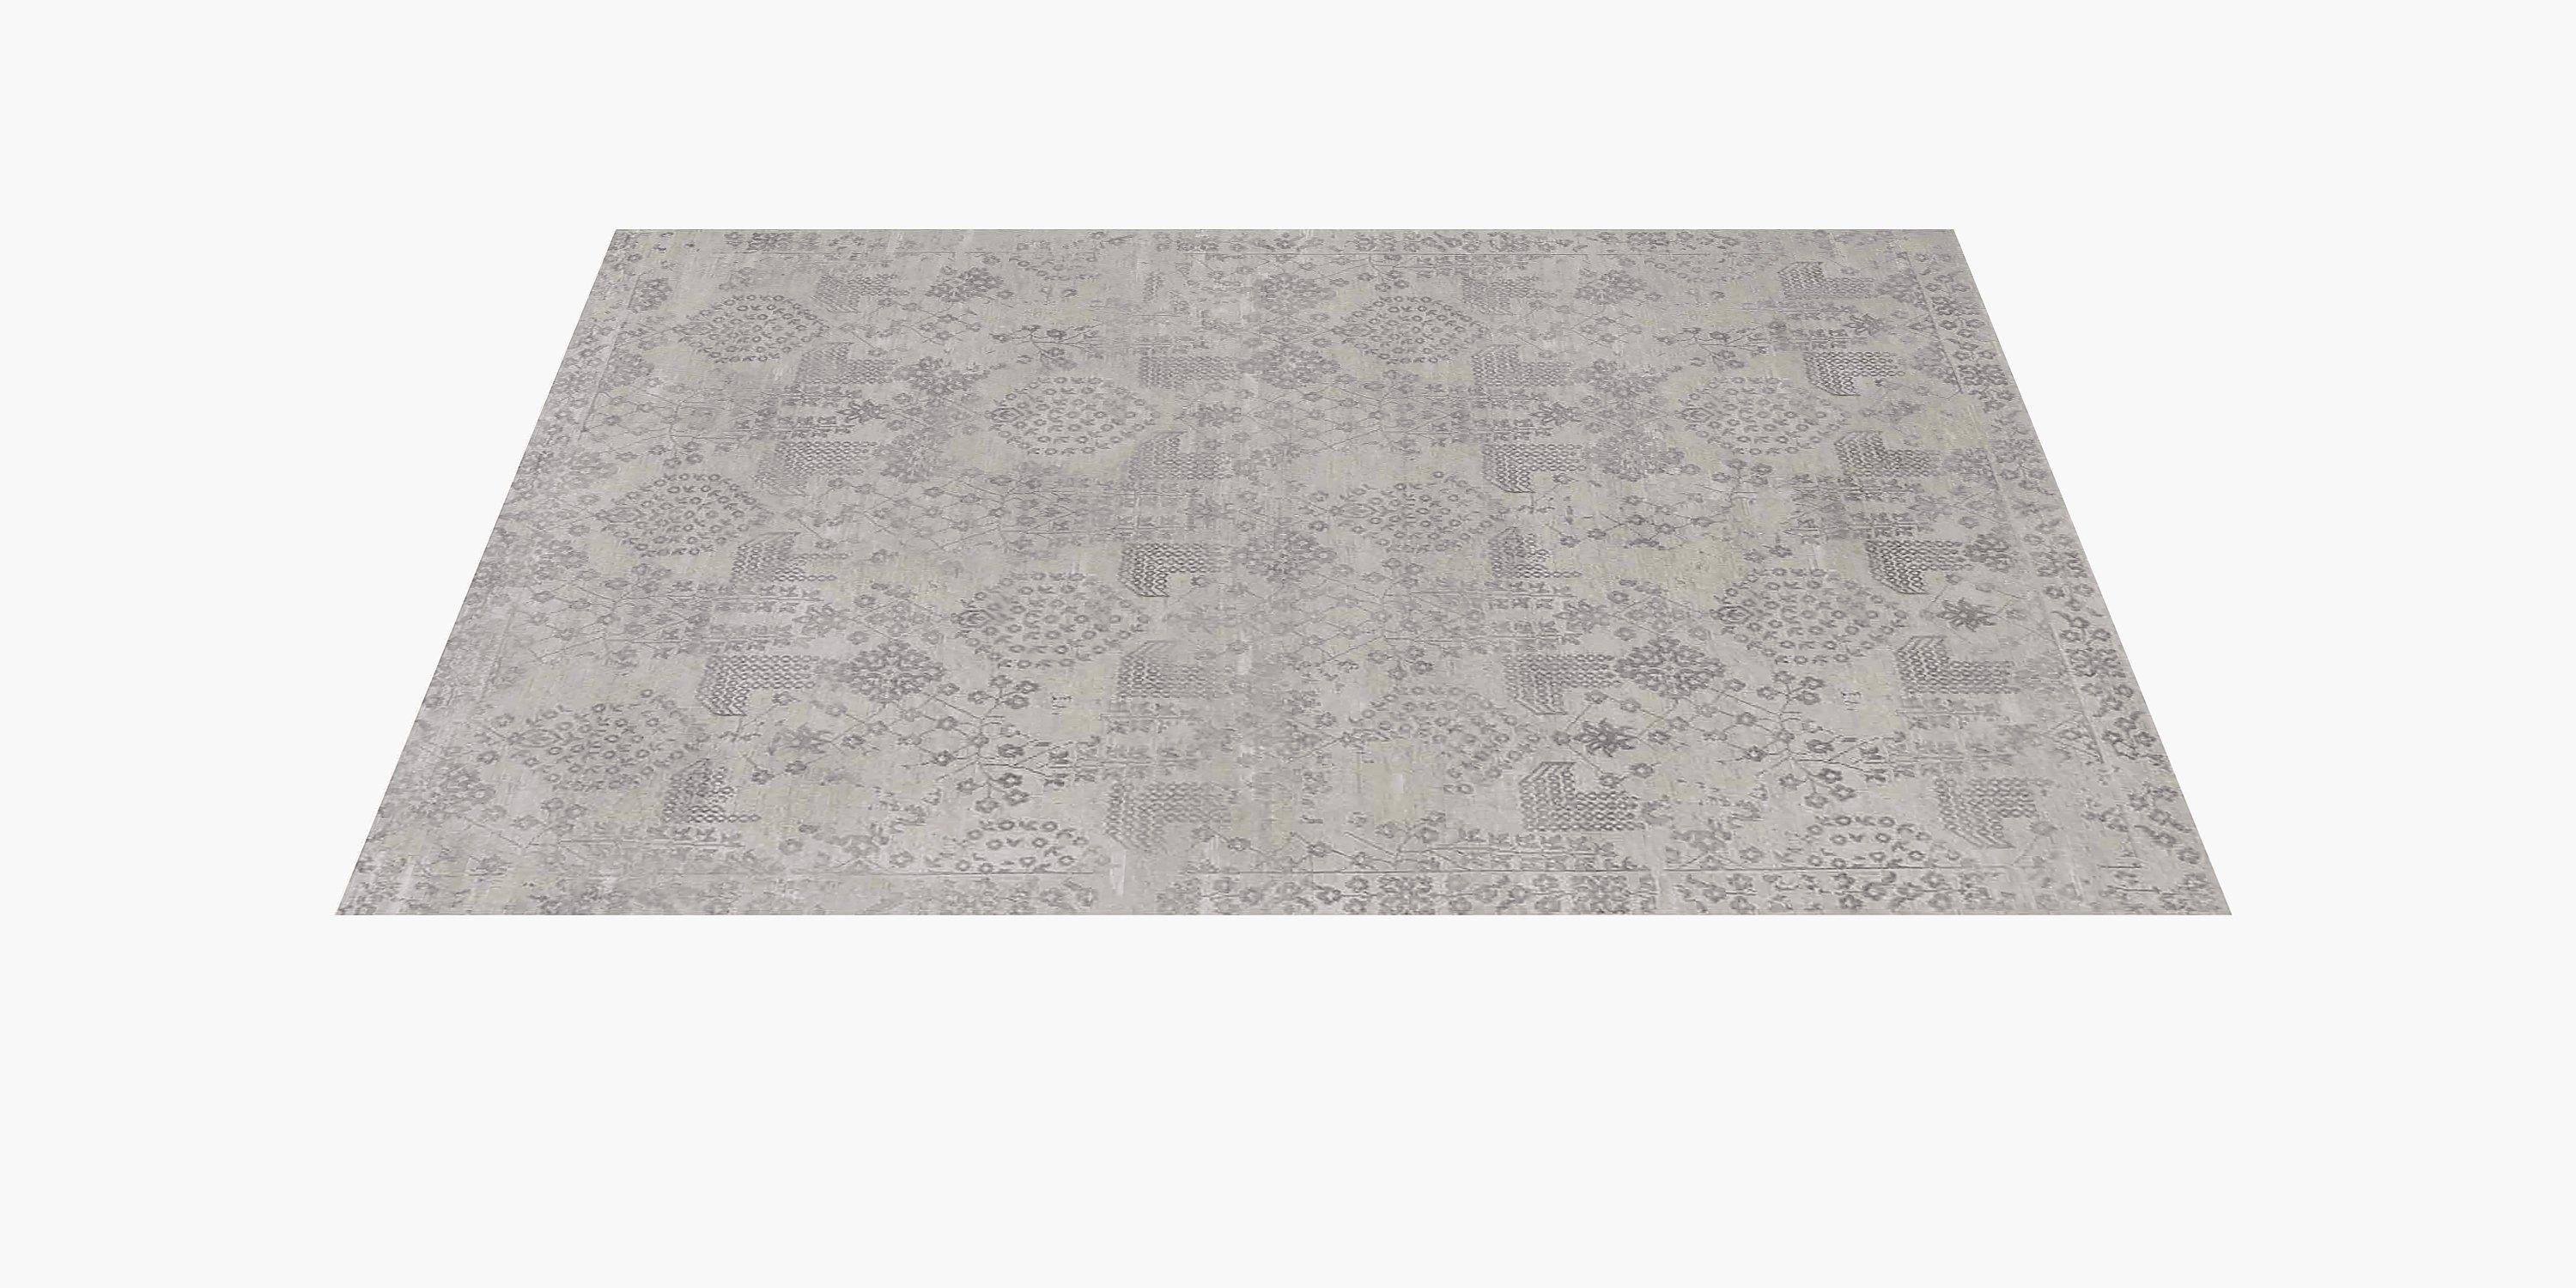 Our modern update of an antique floral motif, this finely hand-knot rug is crafted by master artisans. Exceptionally fine, soft New Zealand wool yarns provide a rich texture and luxurious sheen. The Ben Soleimani collection is inspired by natural